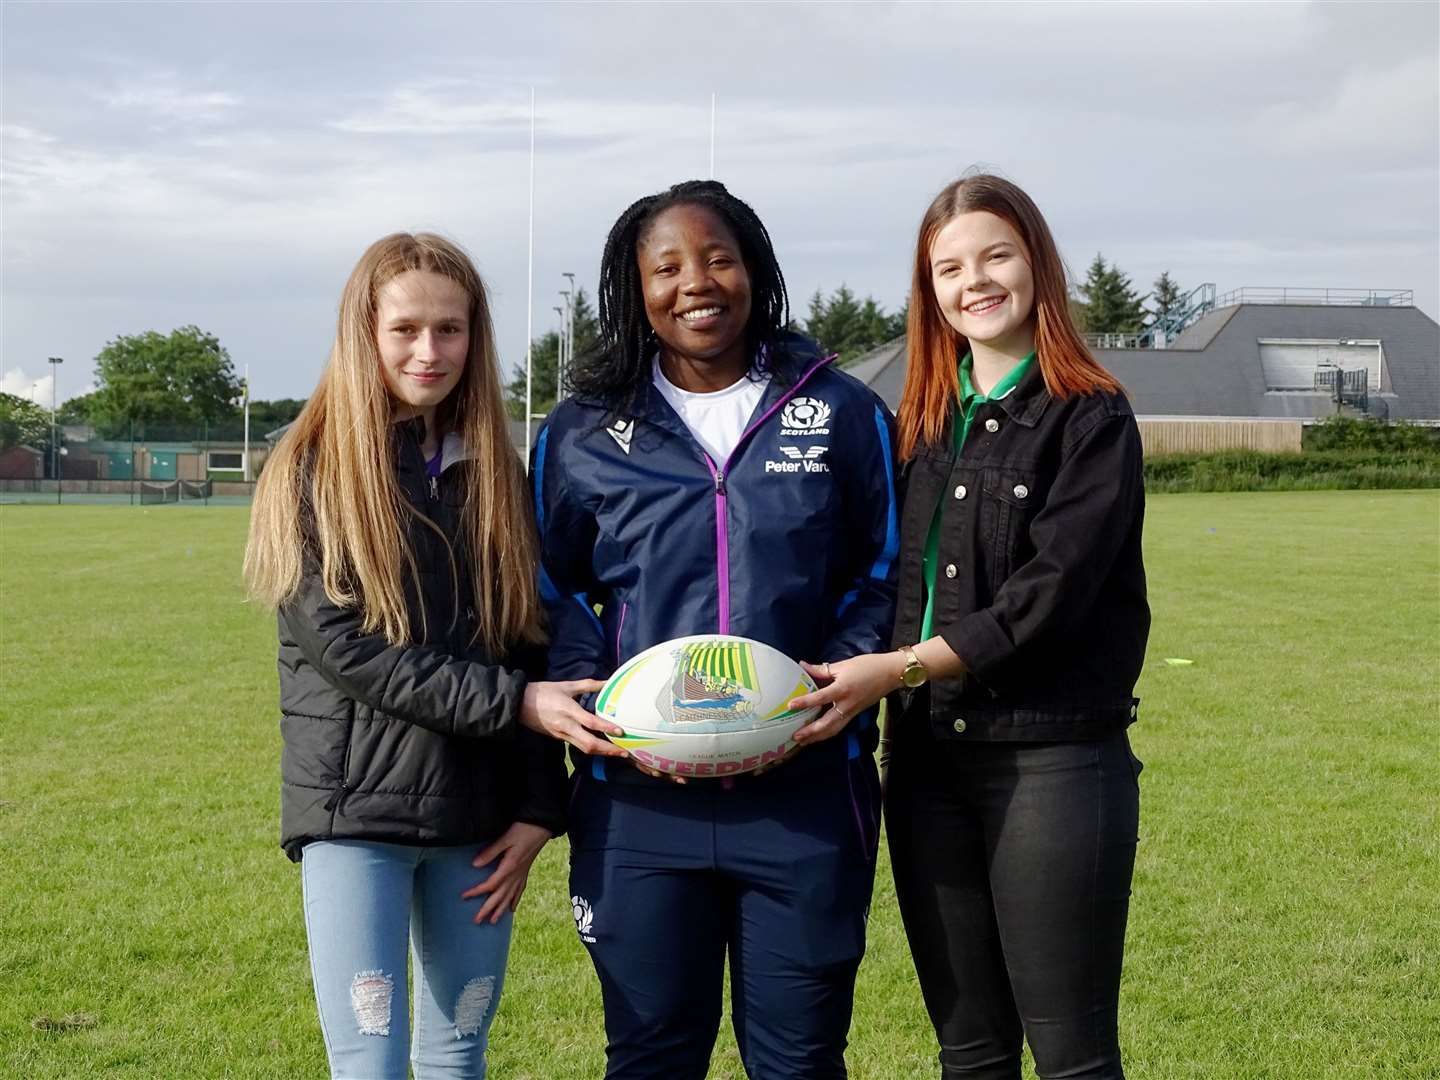 Scottish internationalist Panashe Muzambe is presented with a Caithness RFC rugby ball by Caithness juniors Tamzin Rosie and Rhianna Mackay. Picture: Anja Johnston